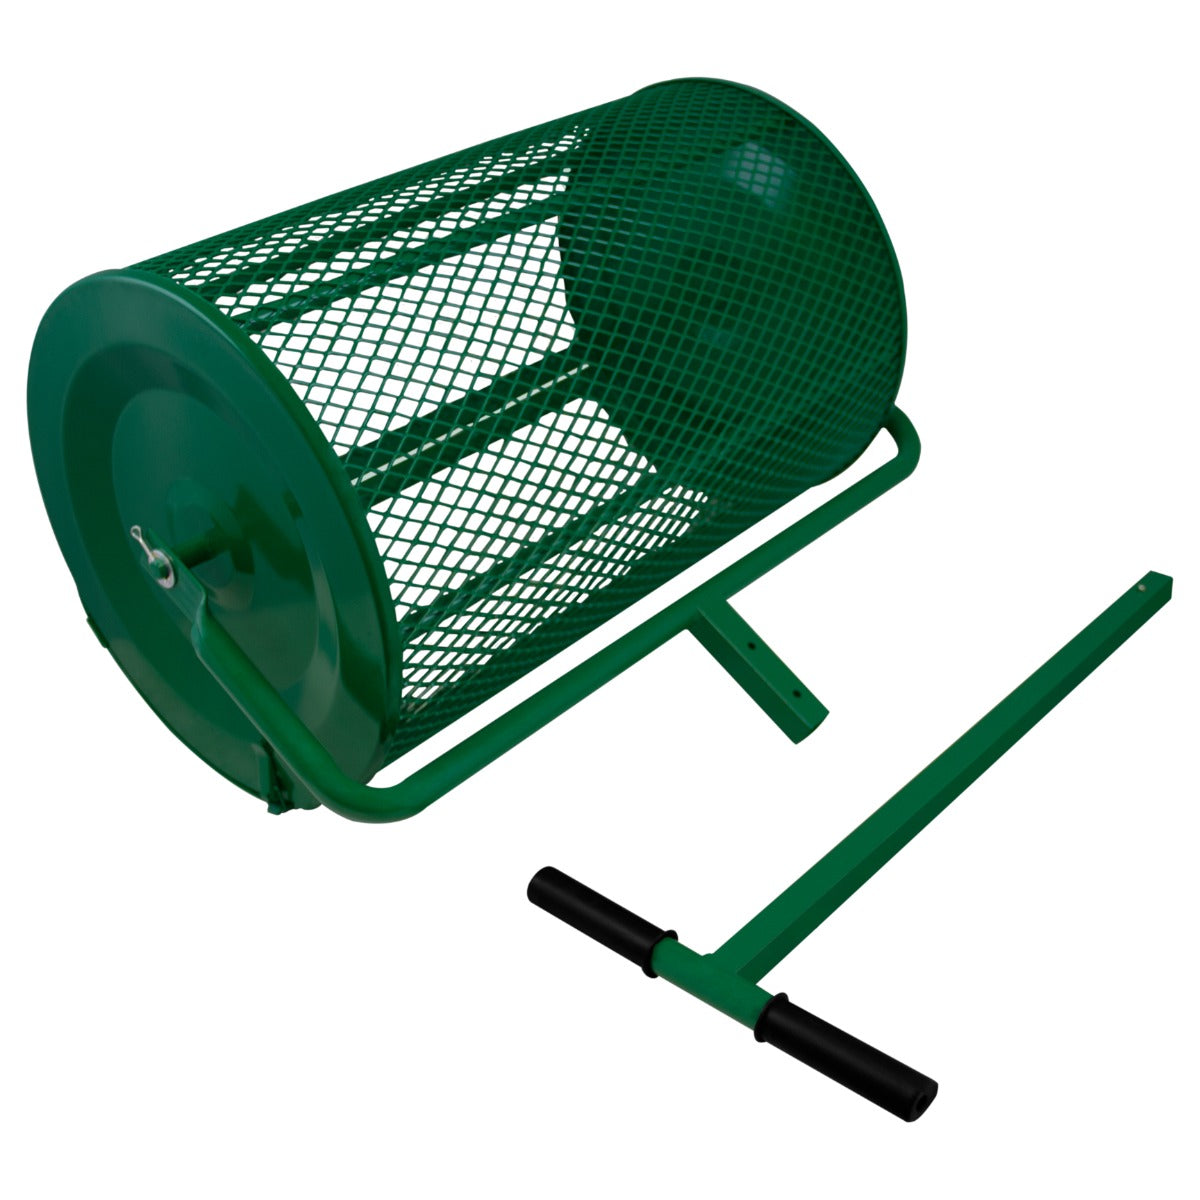 Compost & Peat Moss Spreader - Green